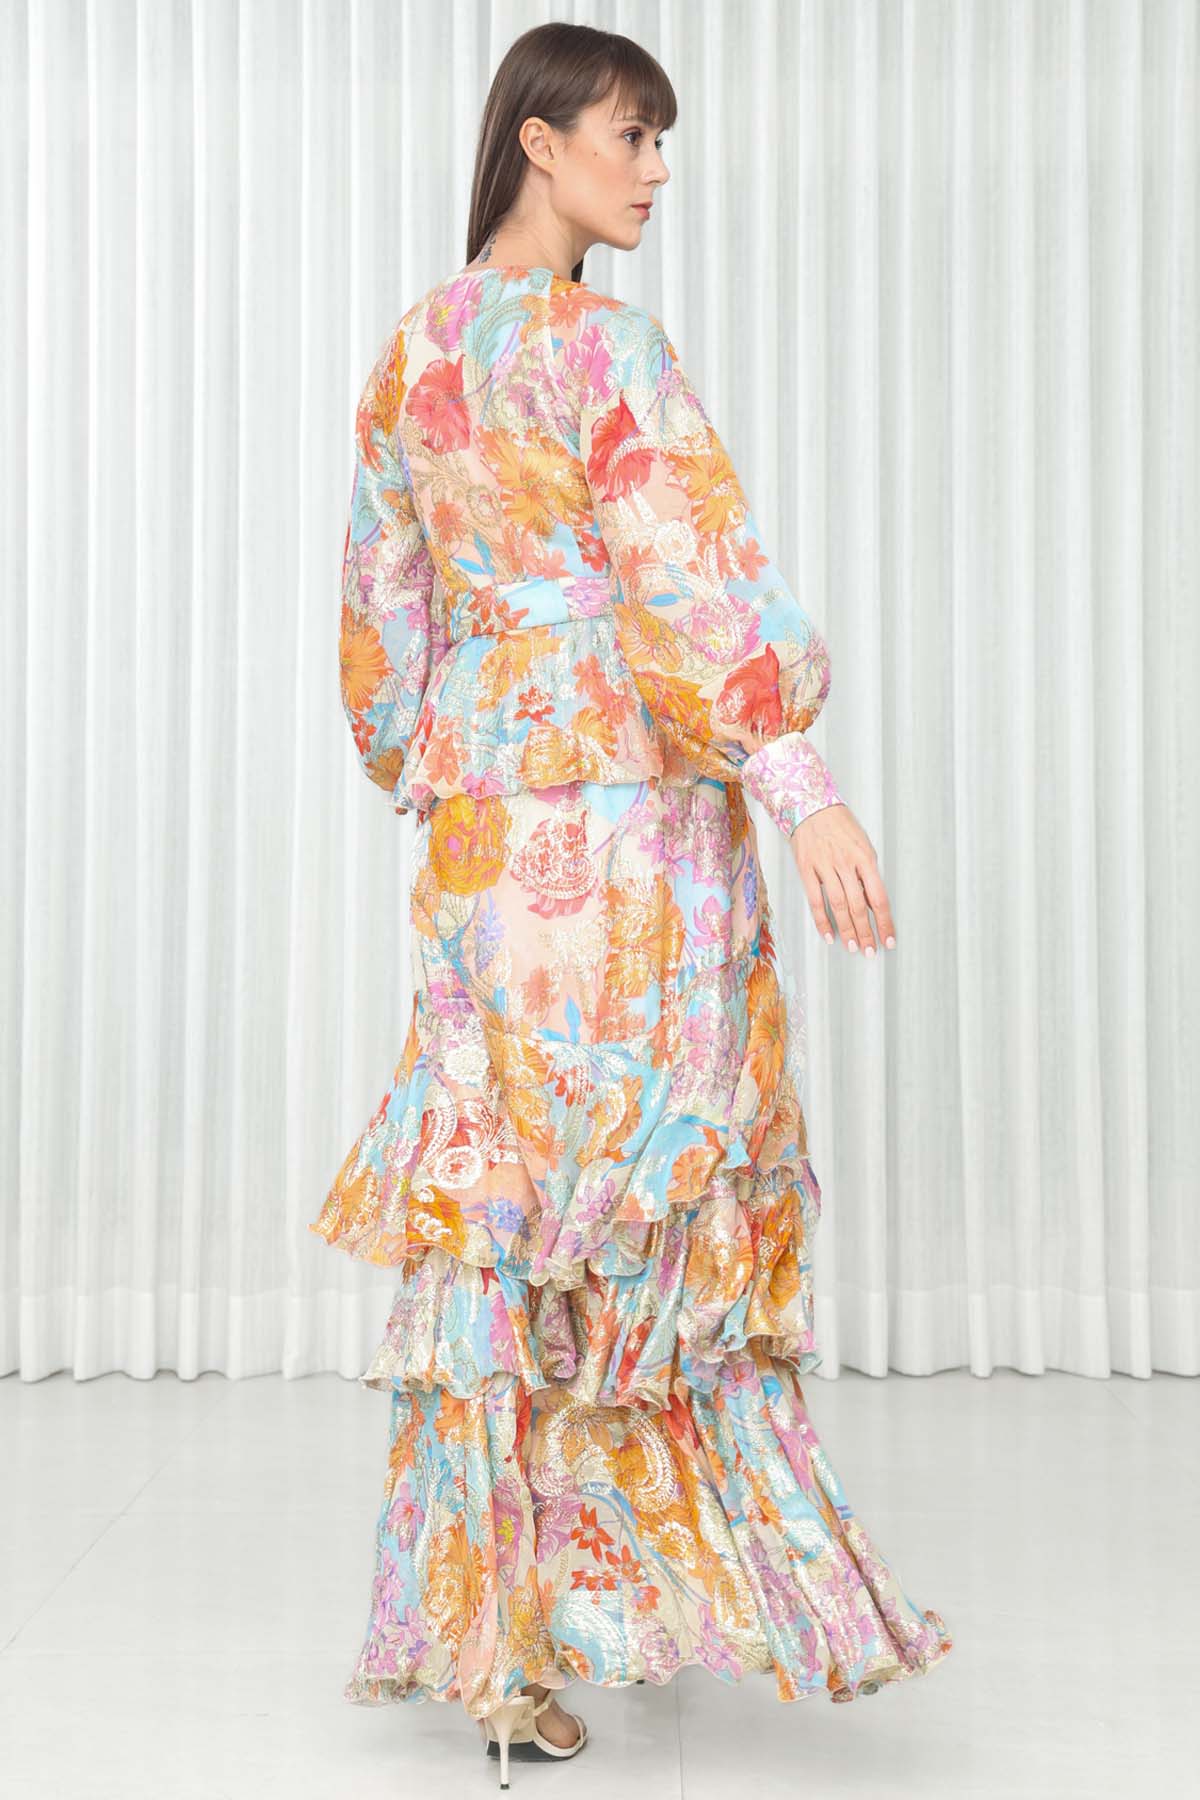 Hisbiscus Printed Layered Dress